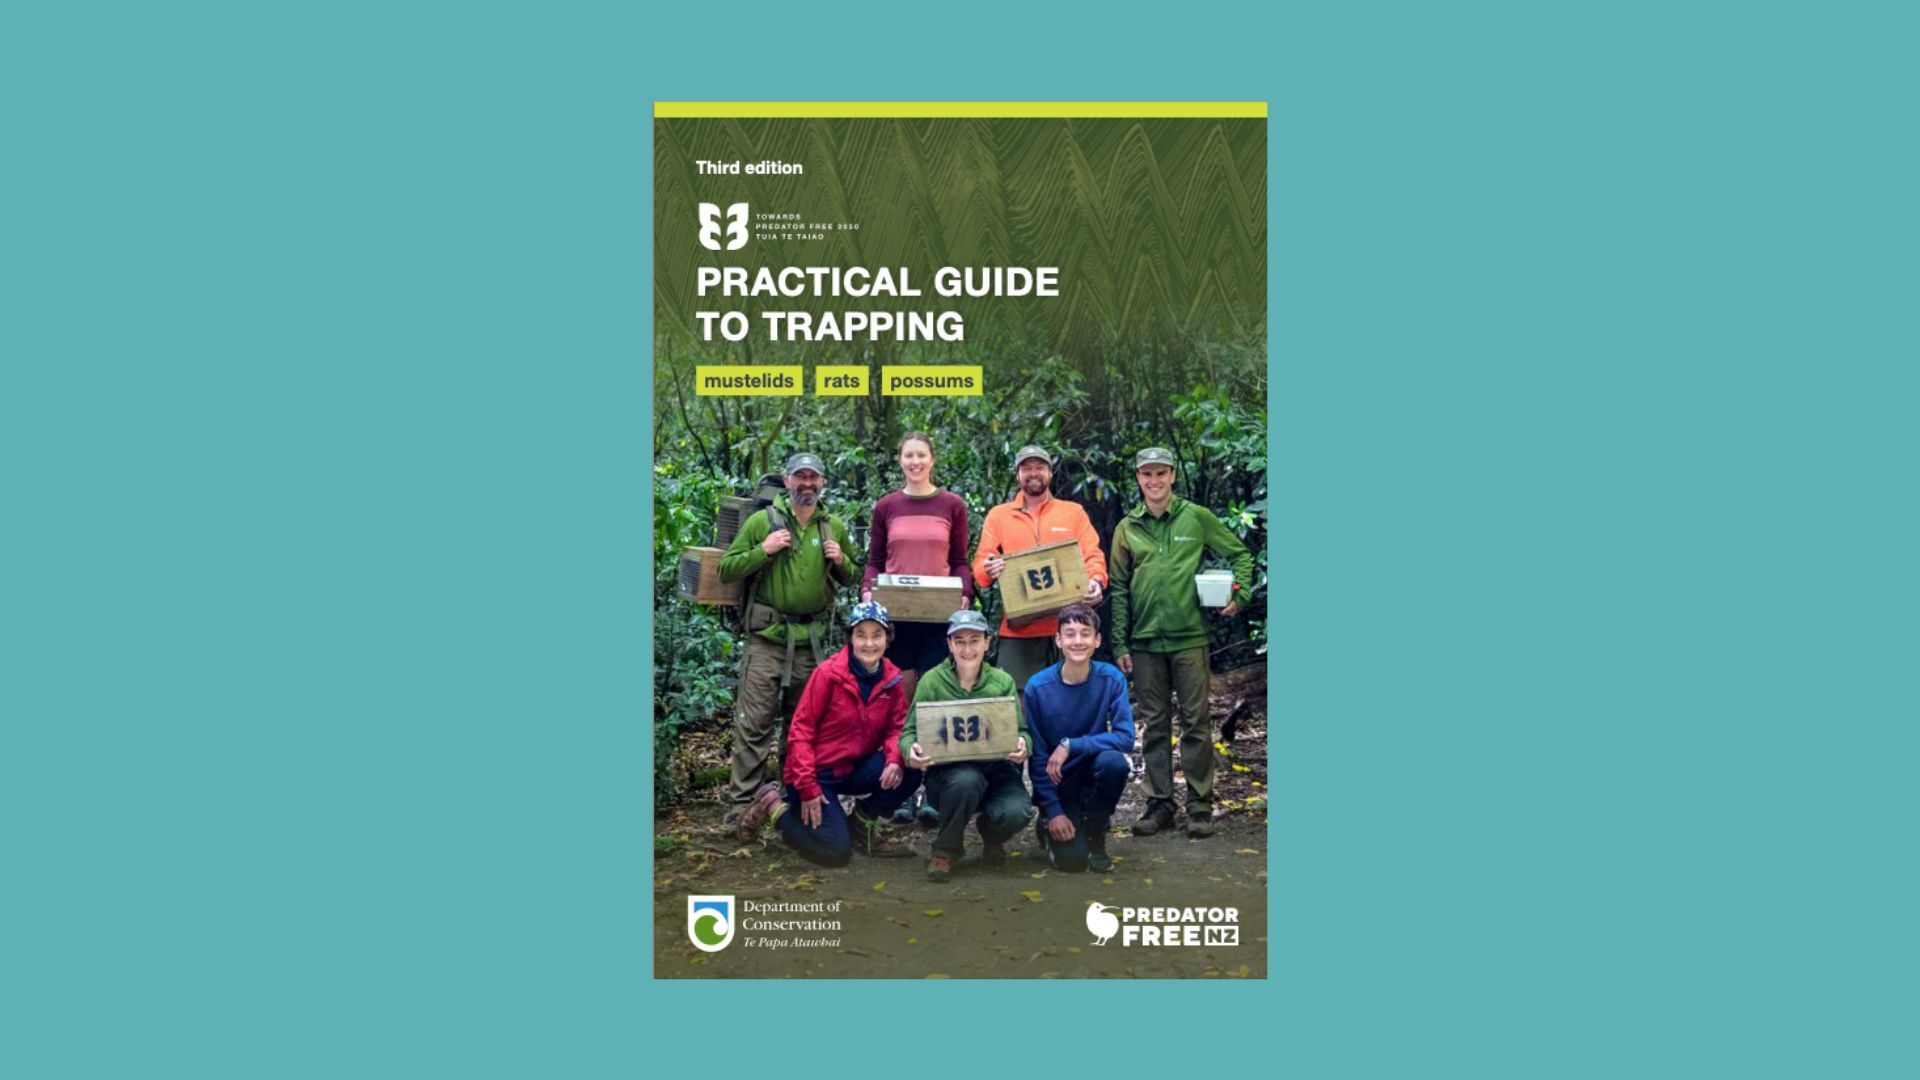 Getting your hands dirty with a practical guide to trapping